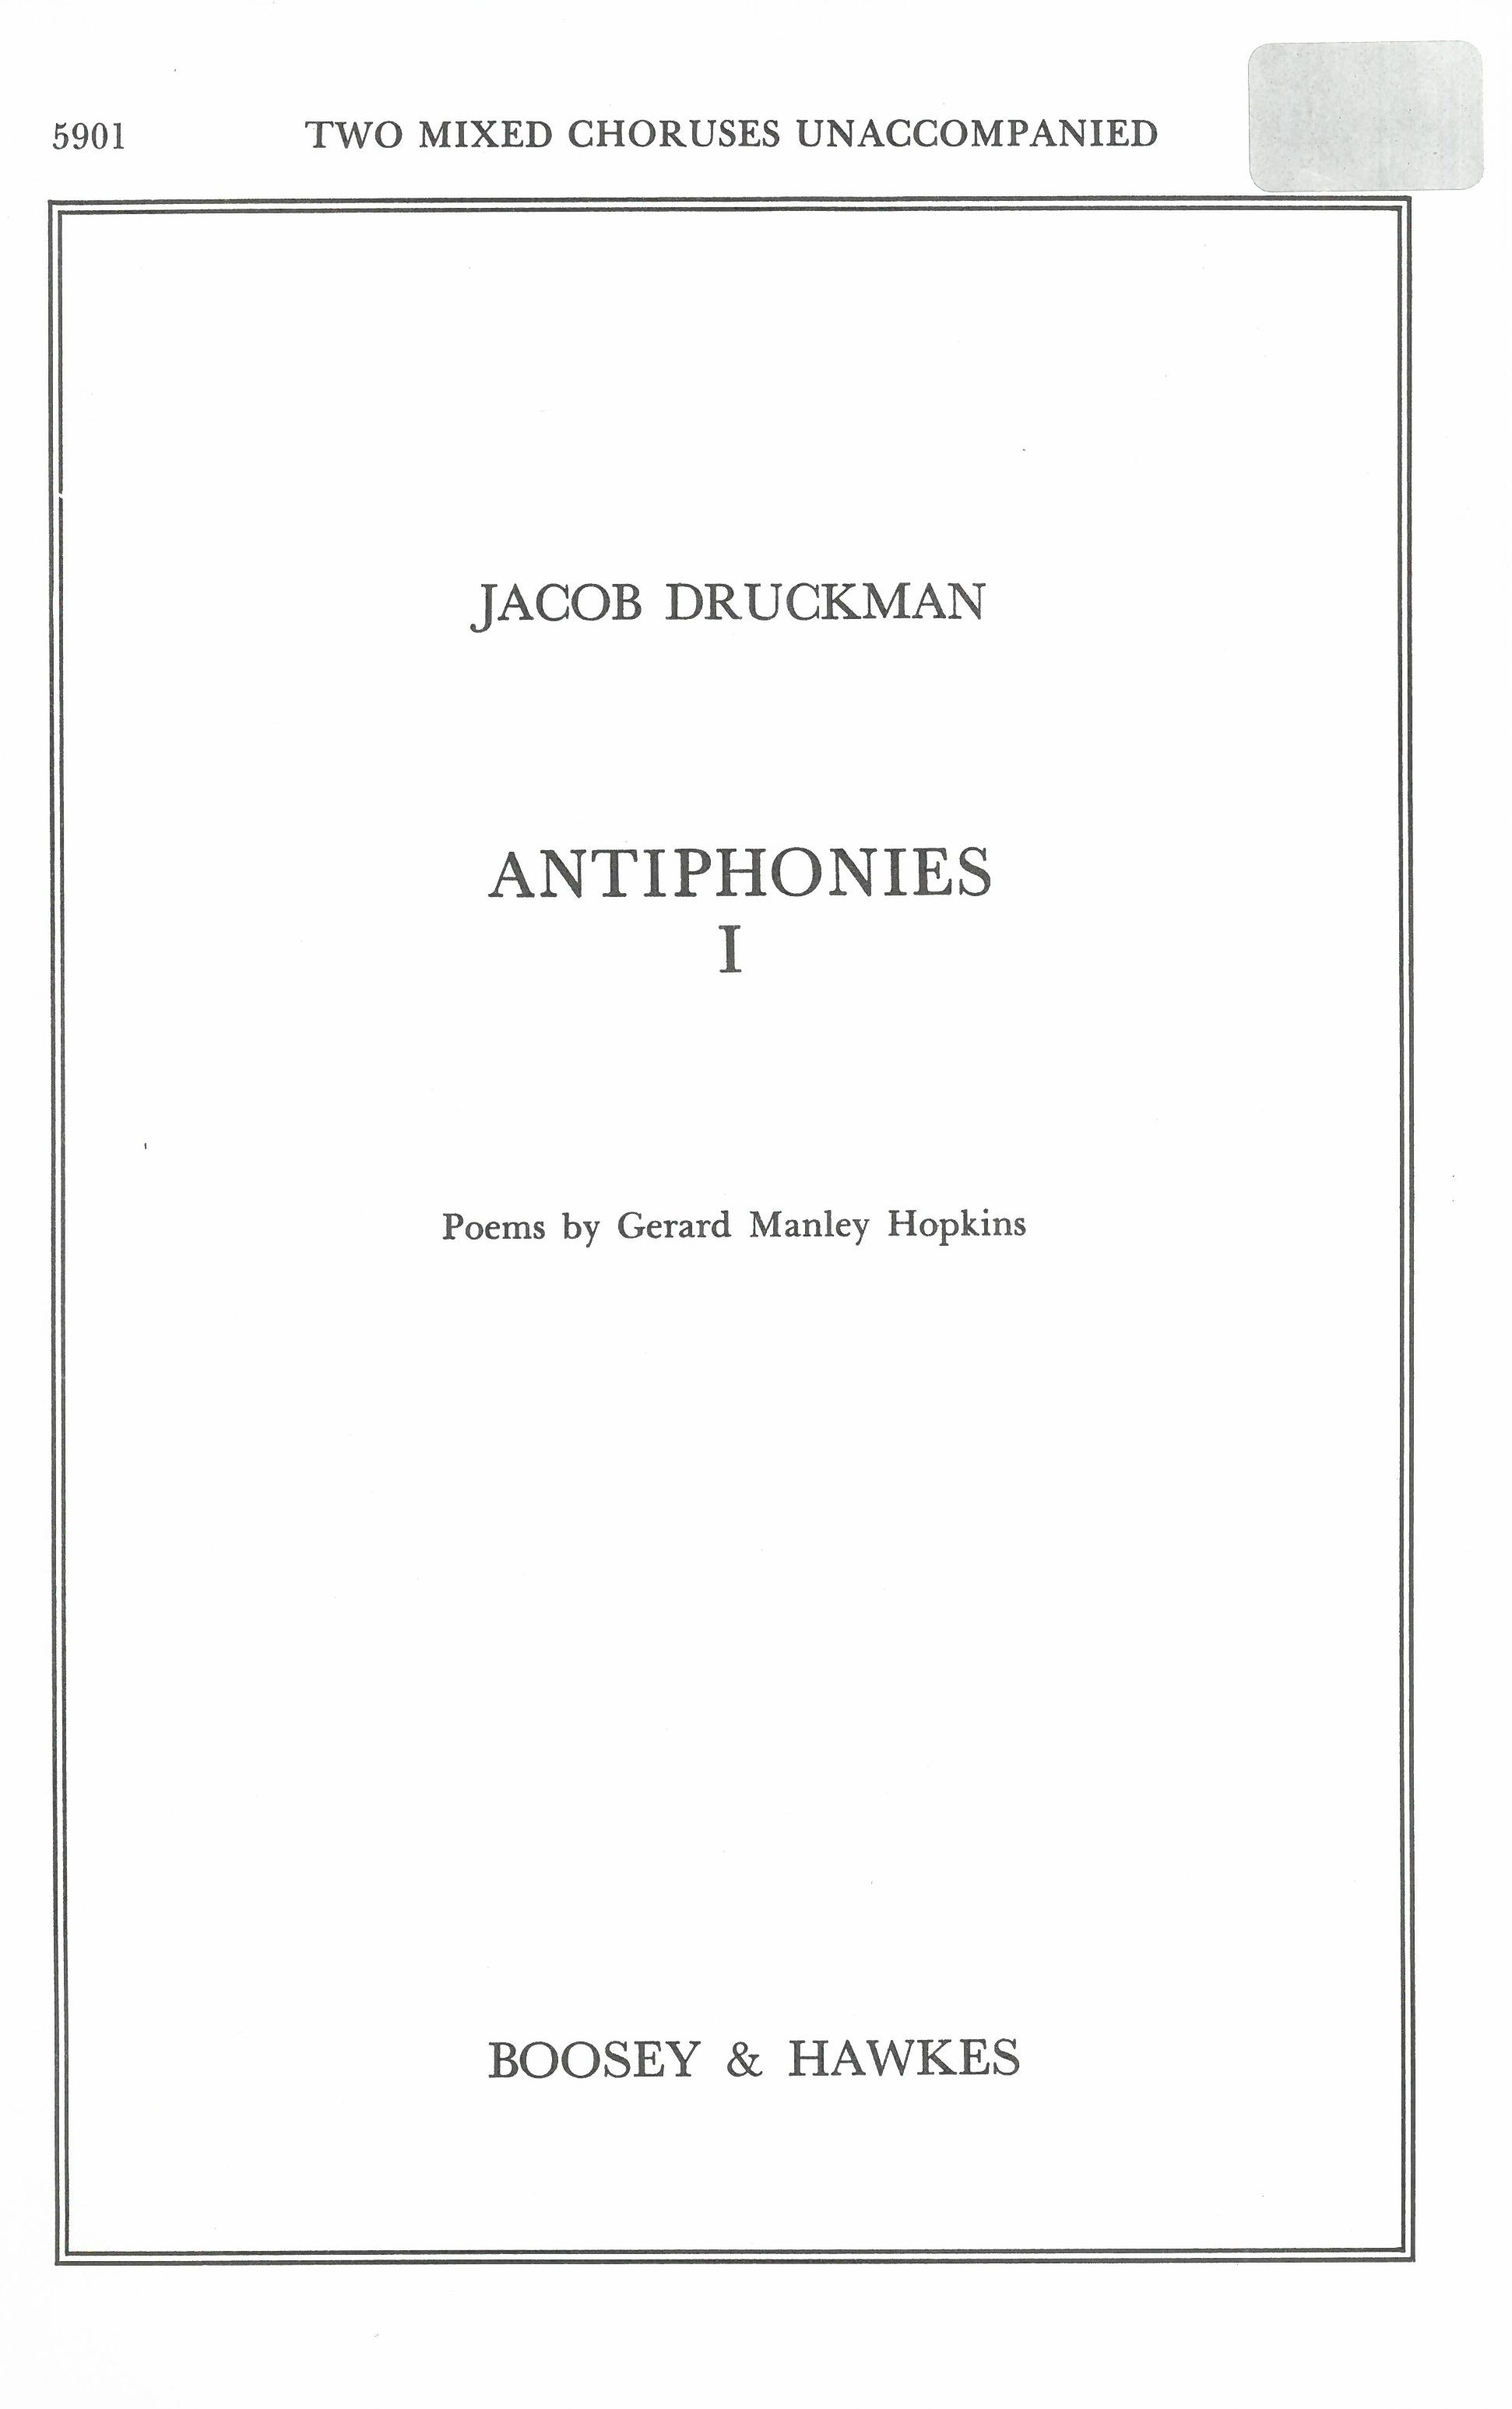 Antiphonies I : For 2 Mixed Choruses.